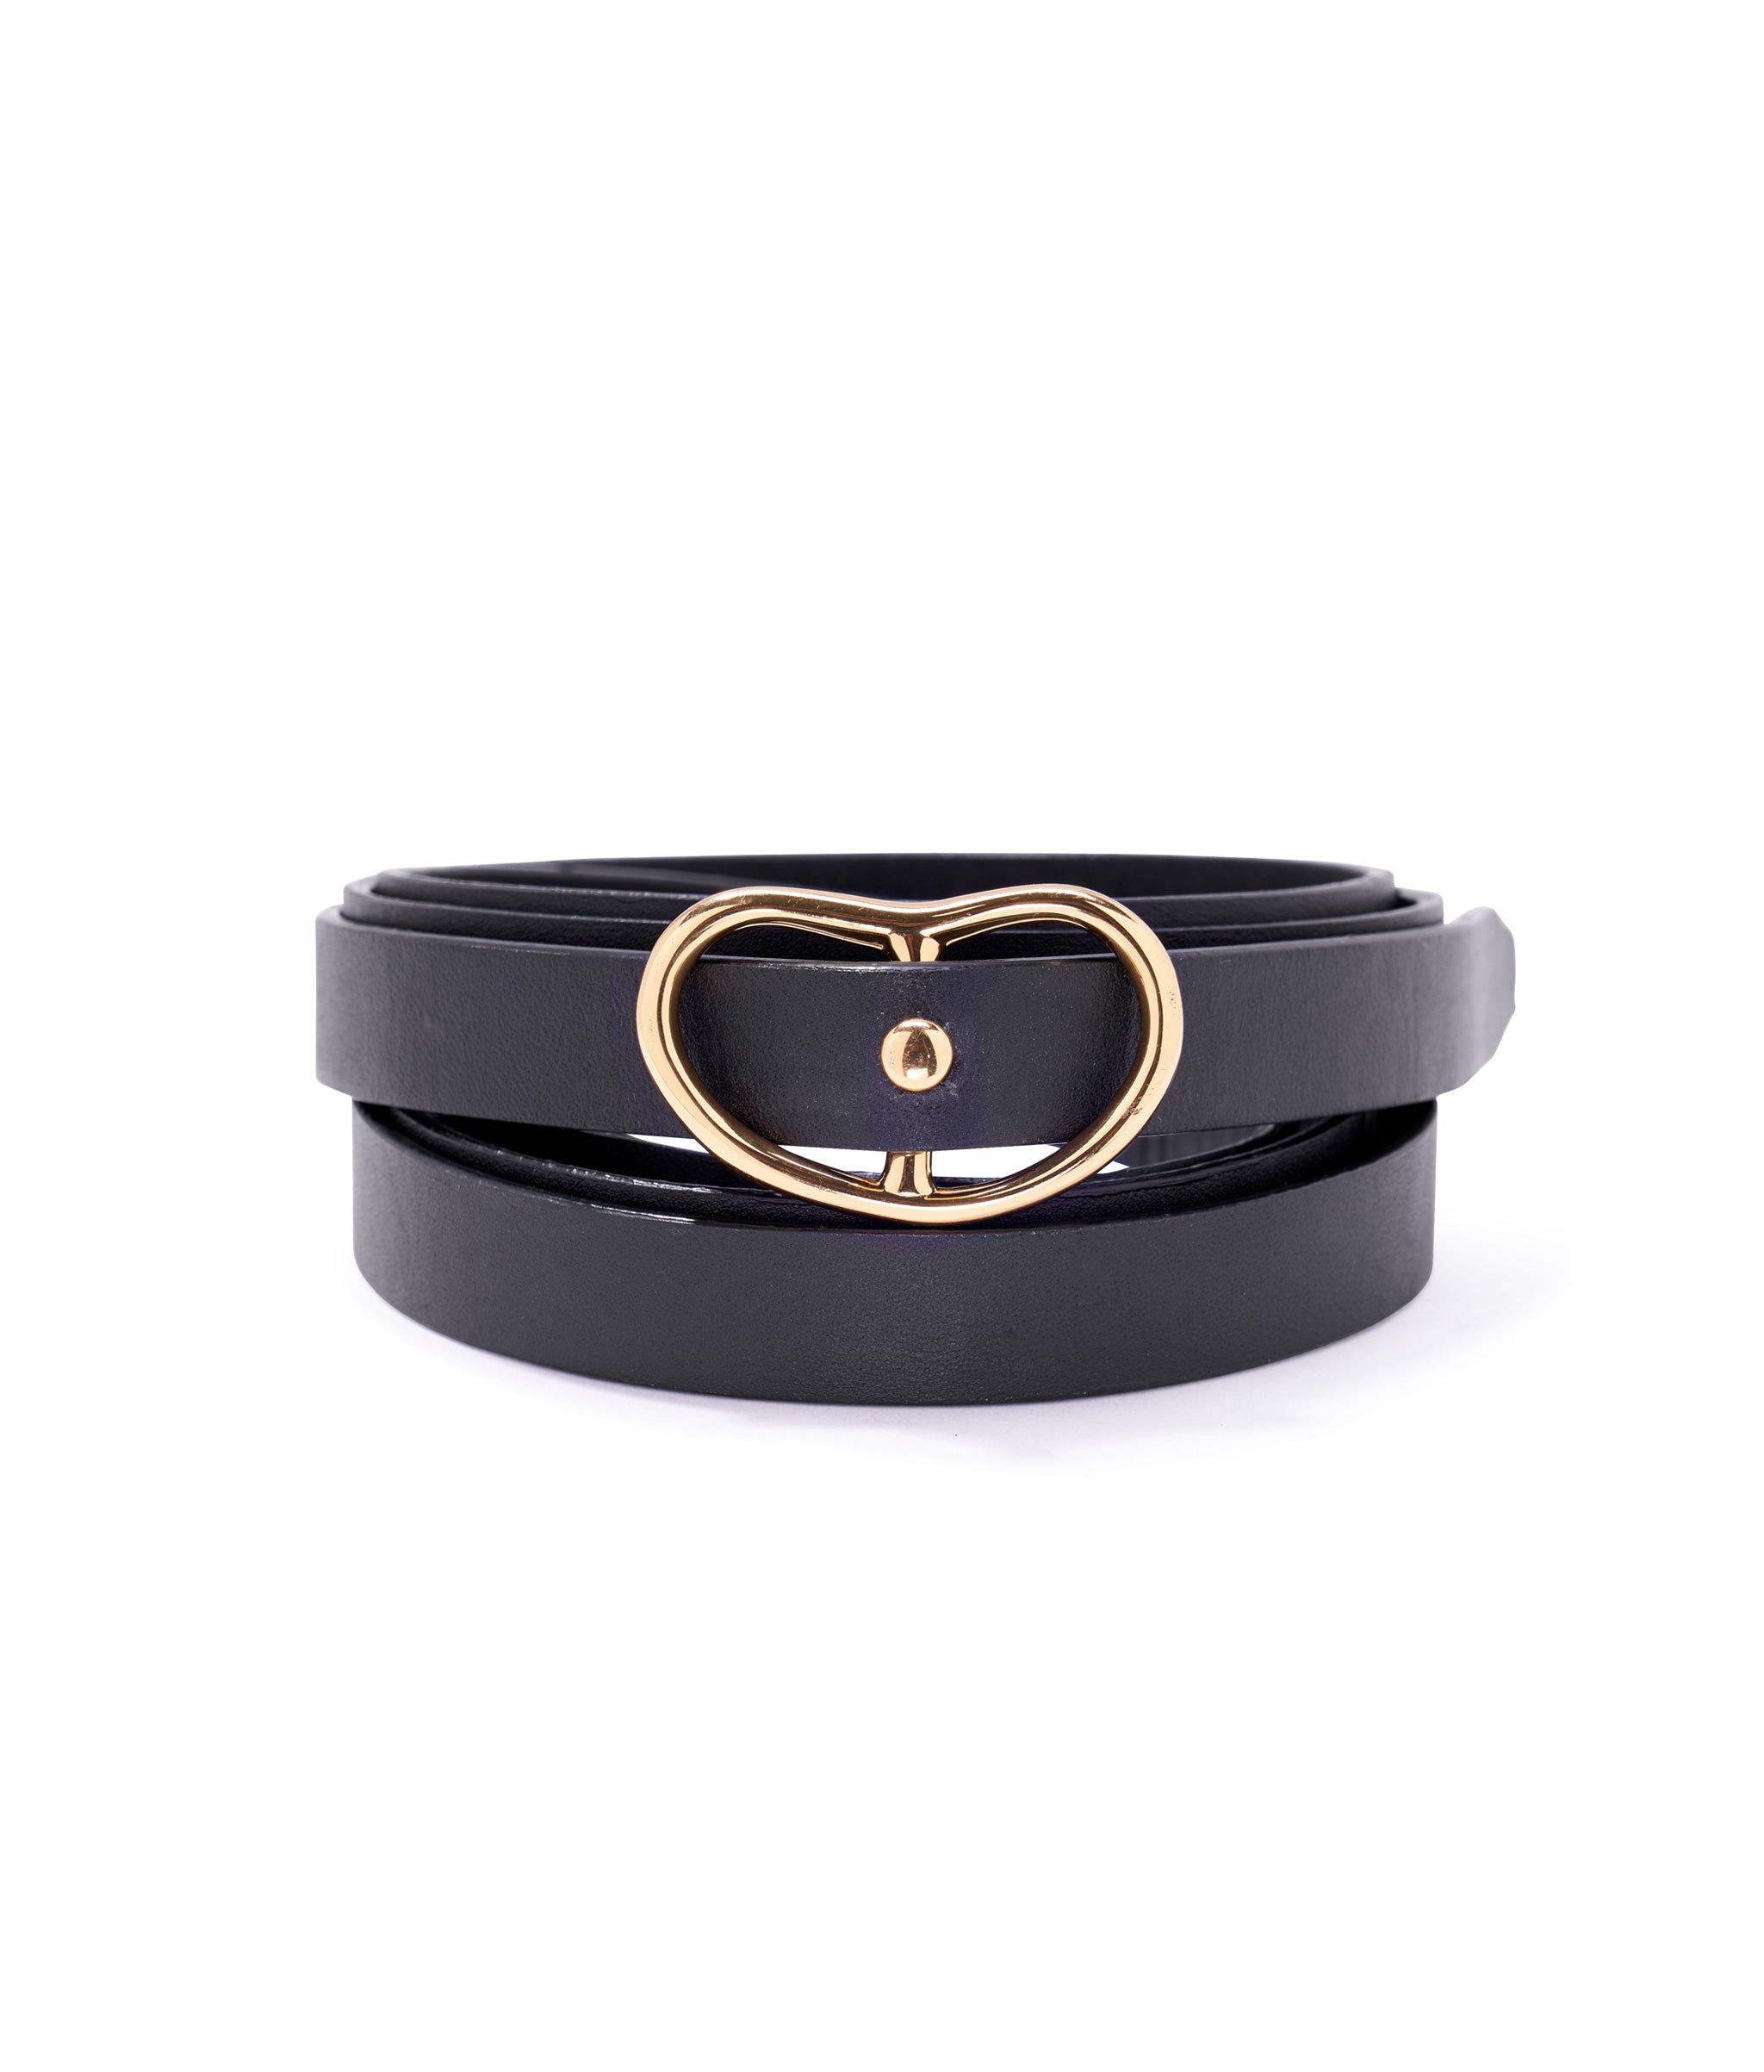 Double Wrap Georgia Belt in Black. Skinny black leather belt with double wrap and kidney-shaped gold buckle